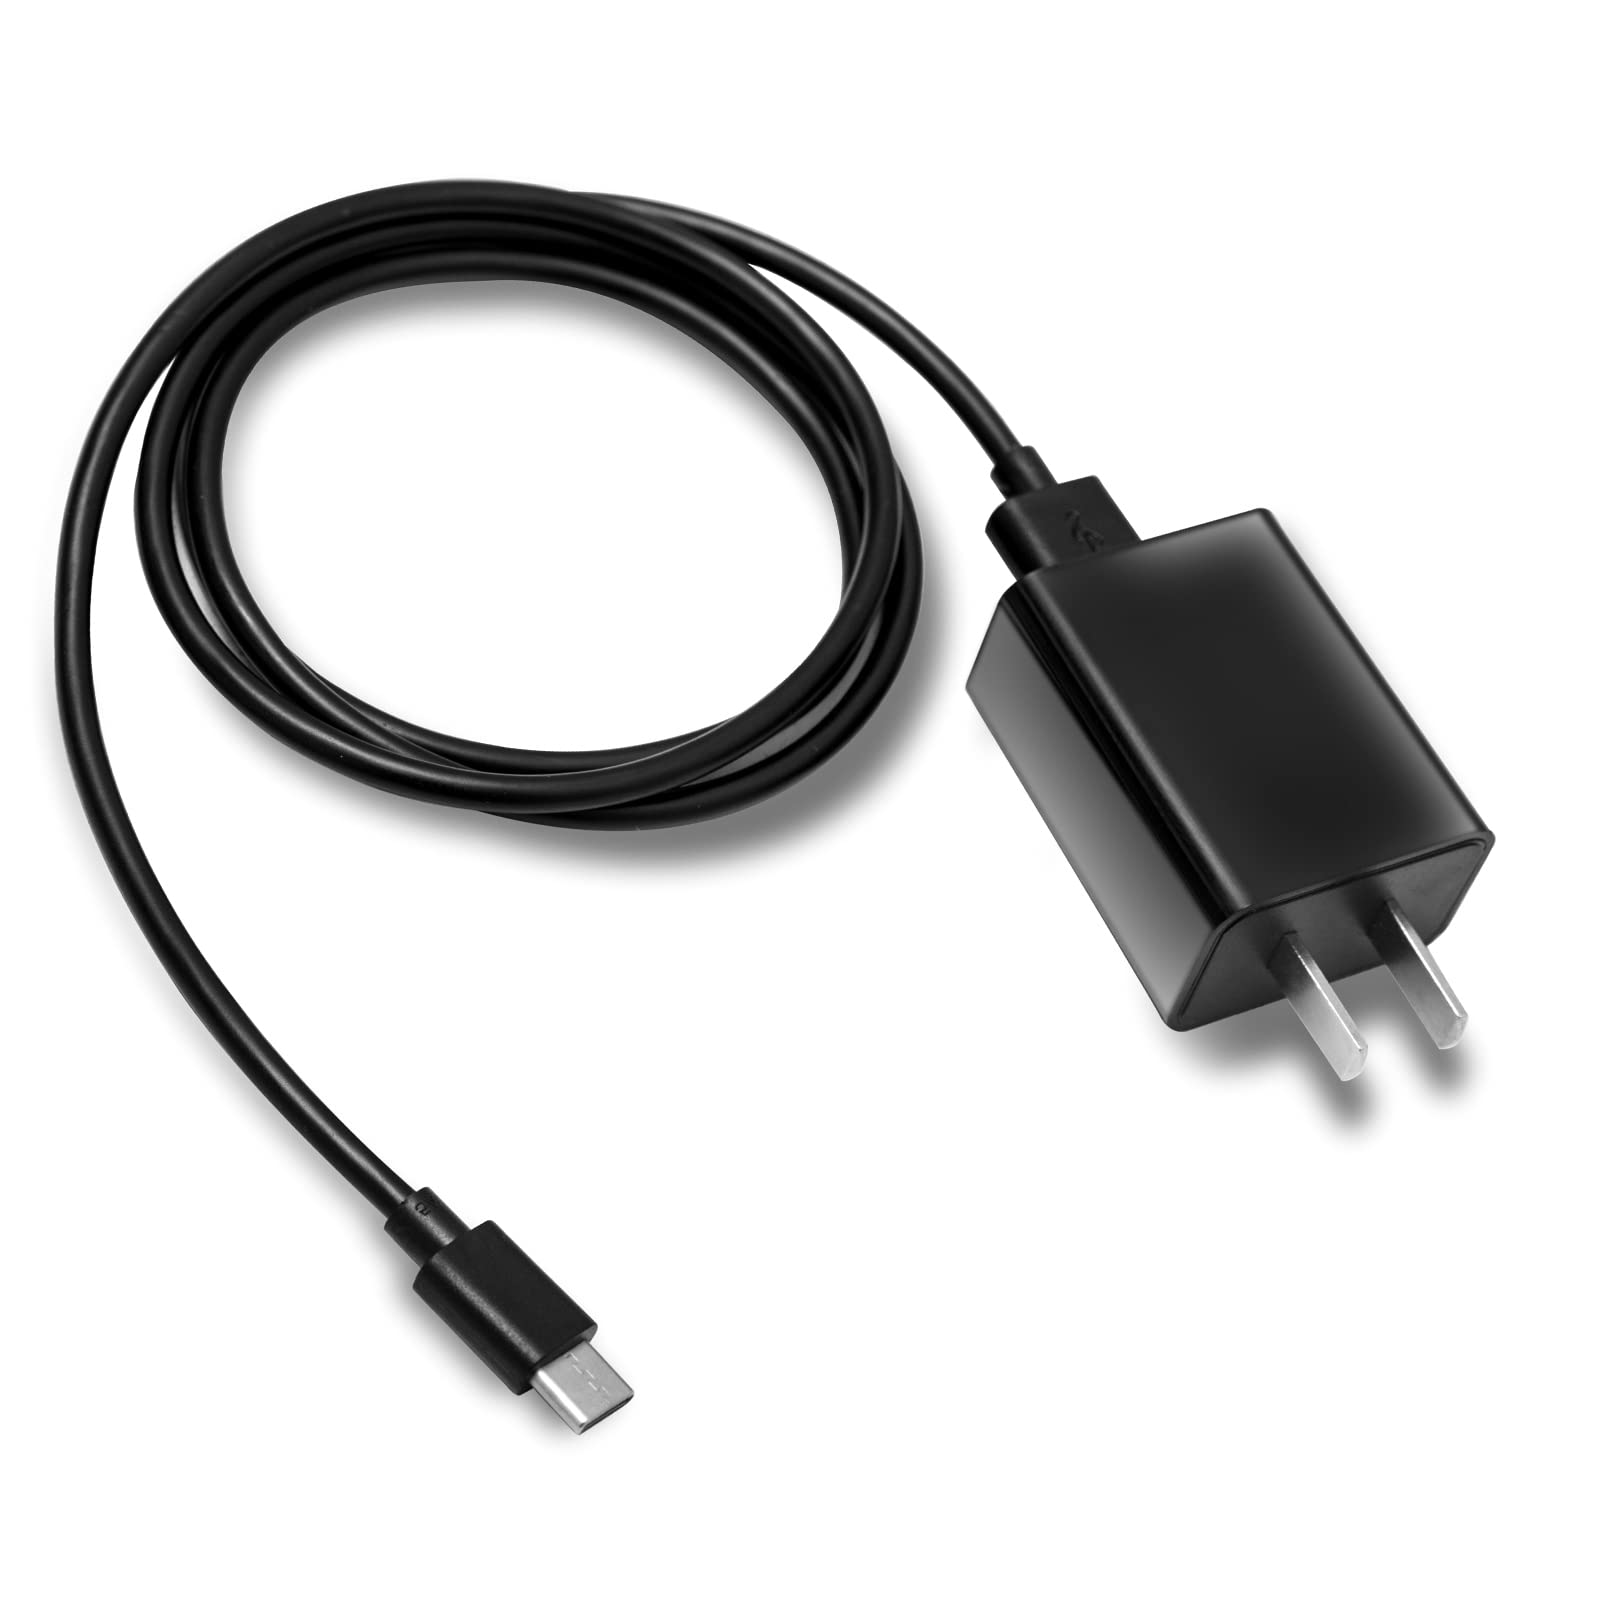 Charging cable and wall adapter